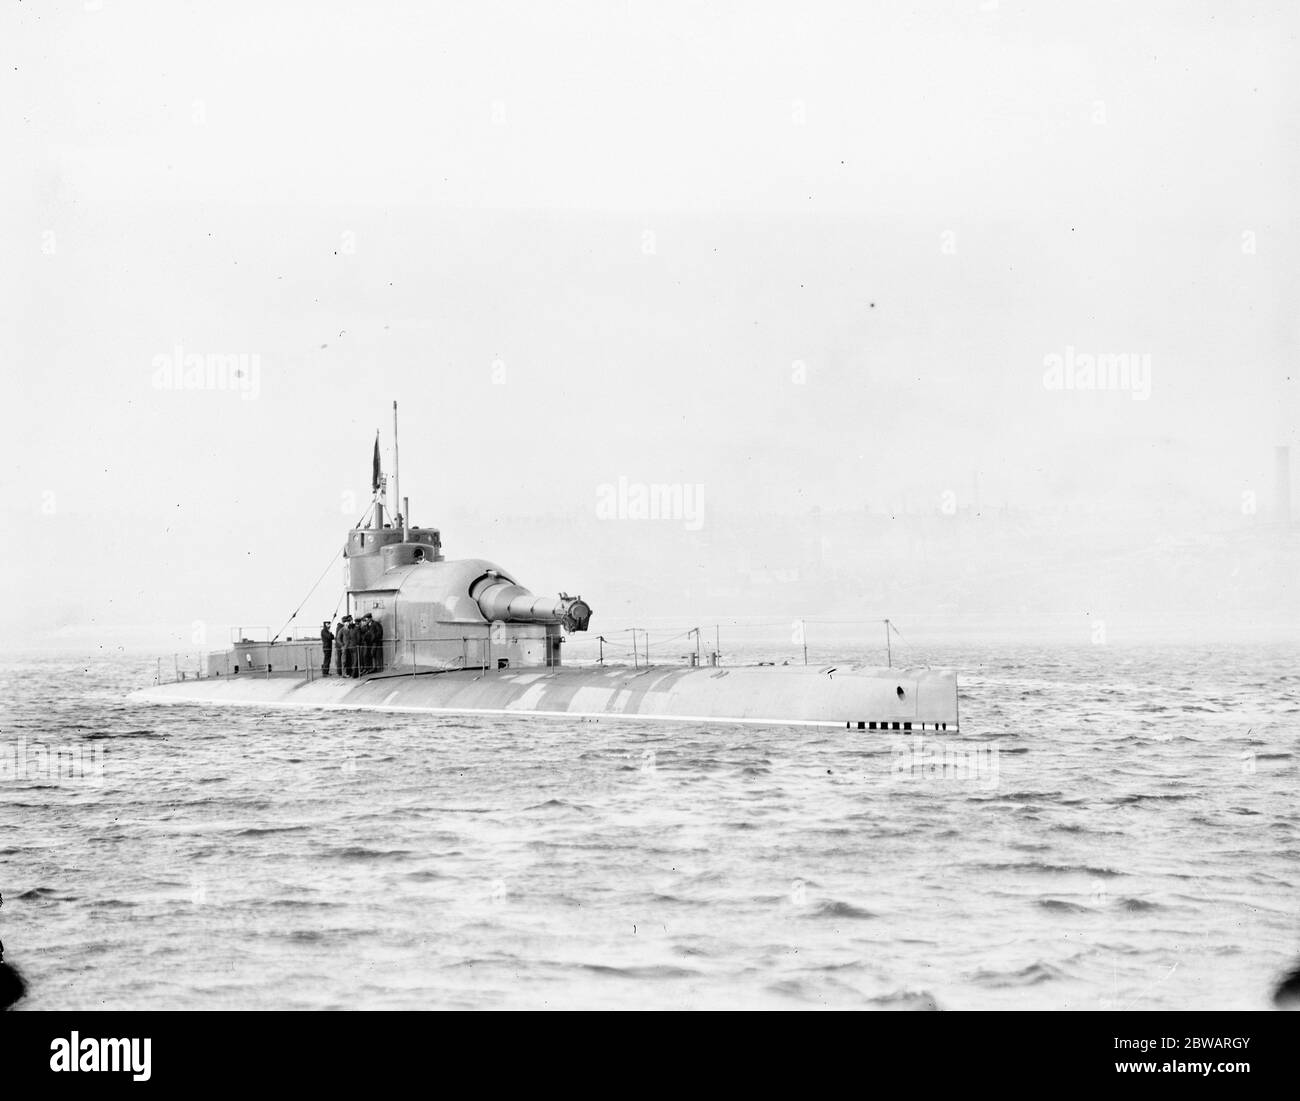 HMS Submarine No 3 During her sea trials her 12 inch gun was trialed as well 30 March 1920 Stock Photo